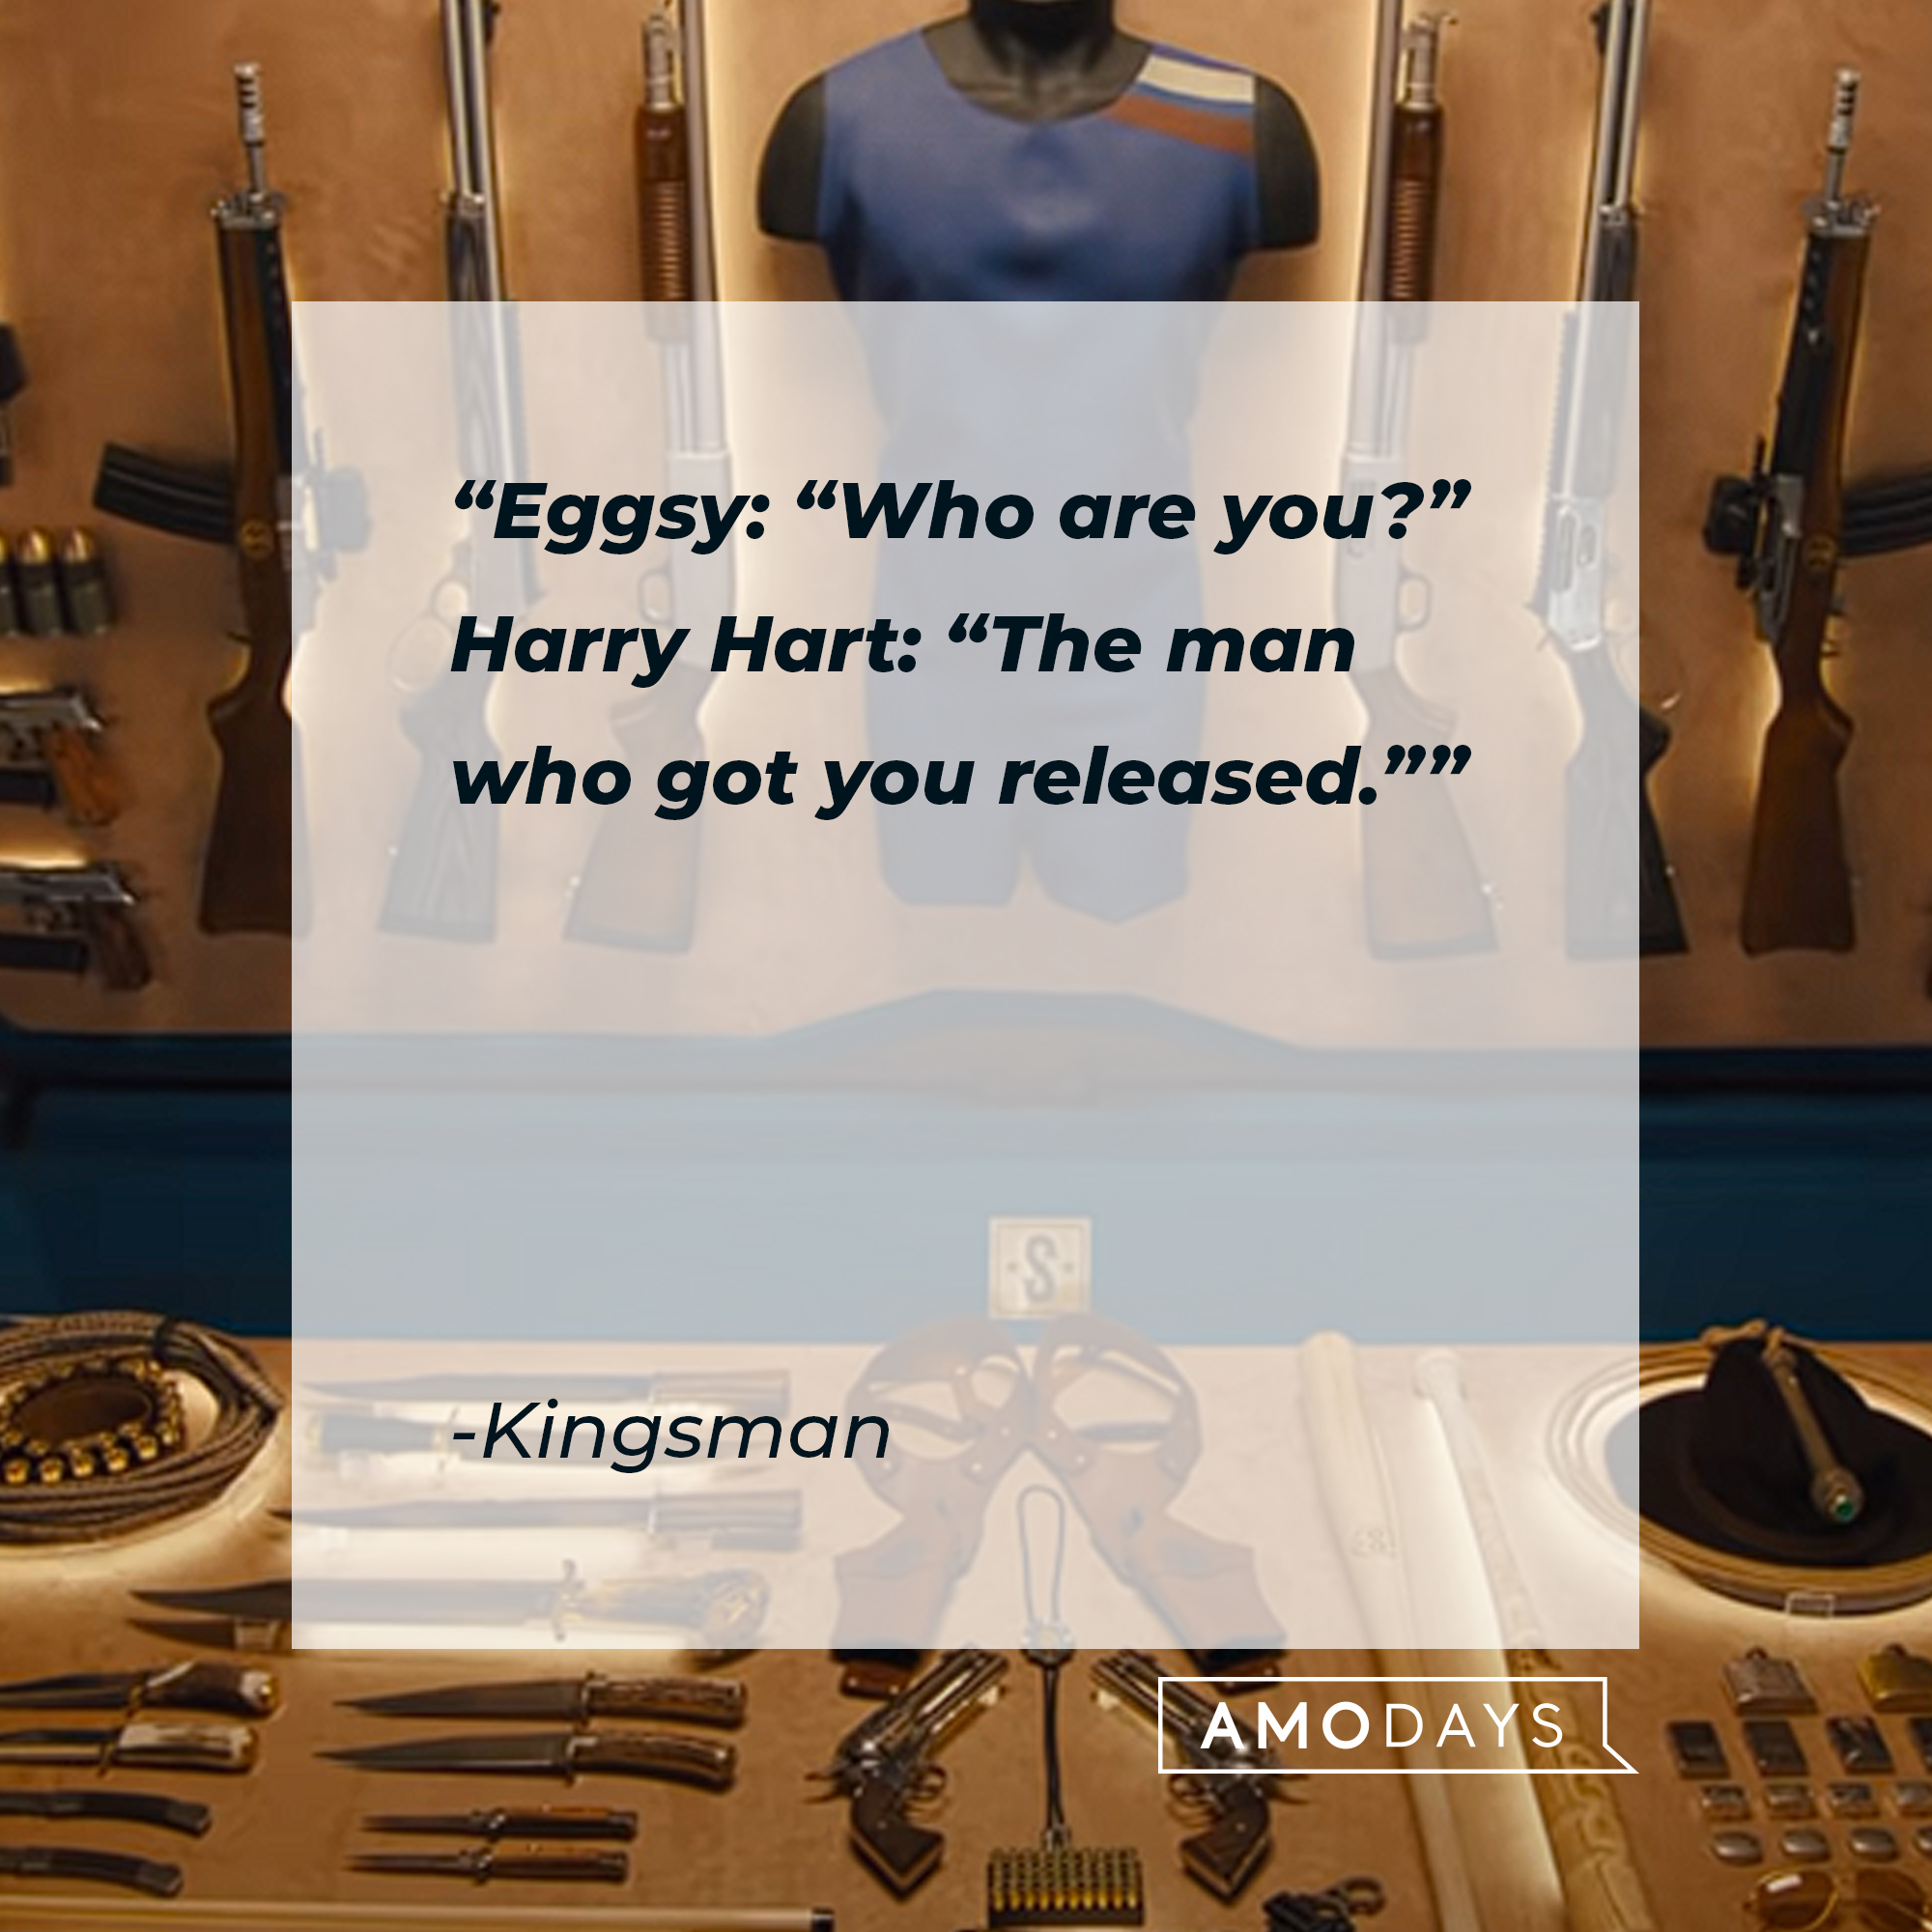 Kingsman quotes: Eggsy: "Who are you?" ; Harry Hart: "The man who got you released." | Image: YouTube / 20thCenturyStudios